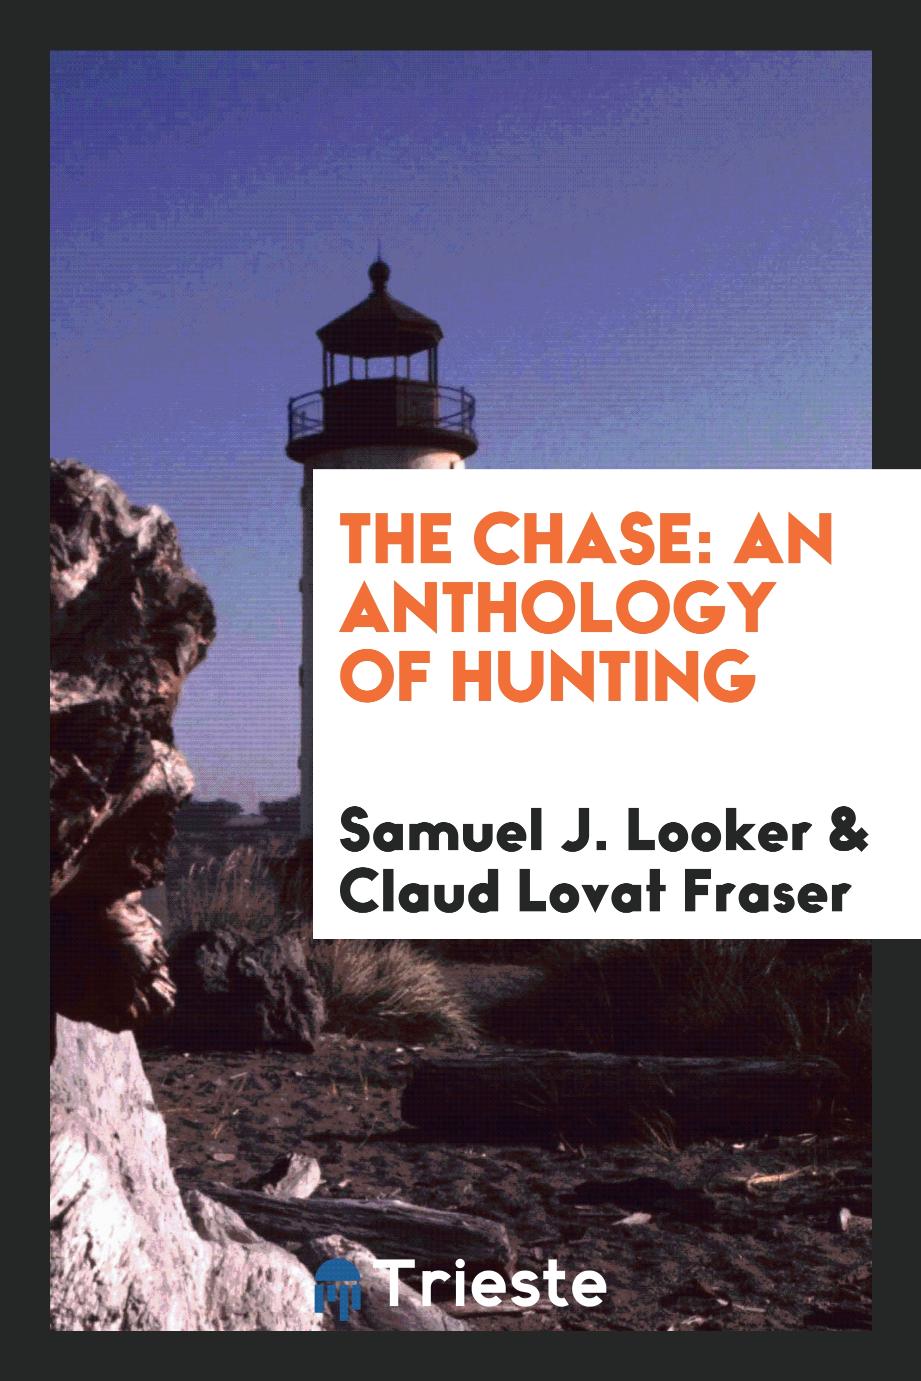 The Chase: an anthology of hunting